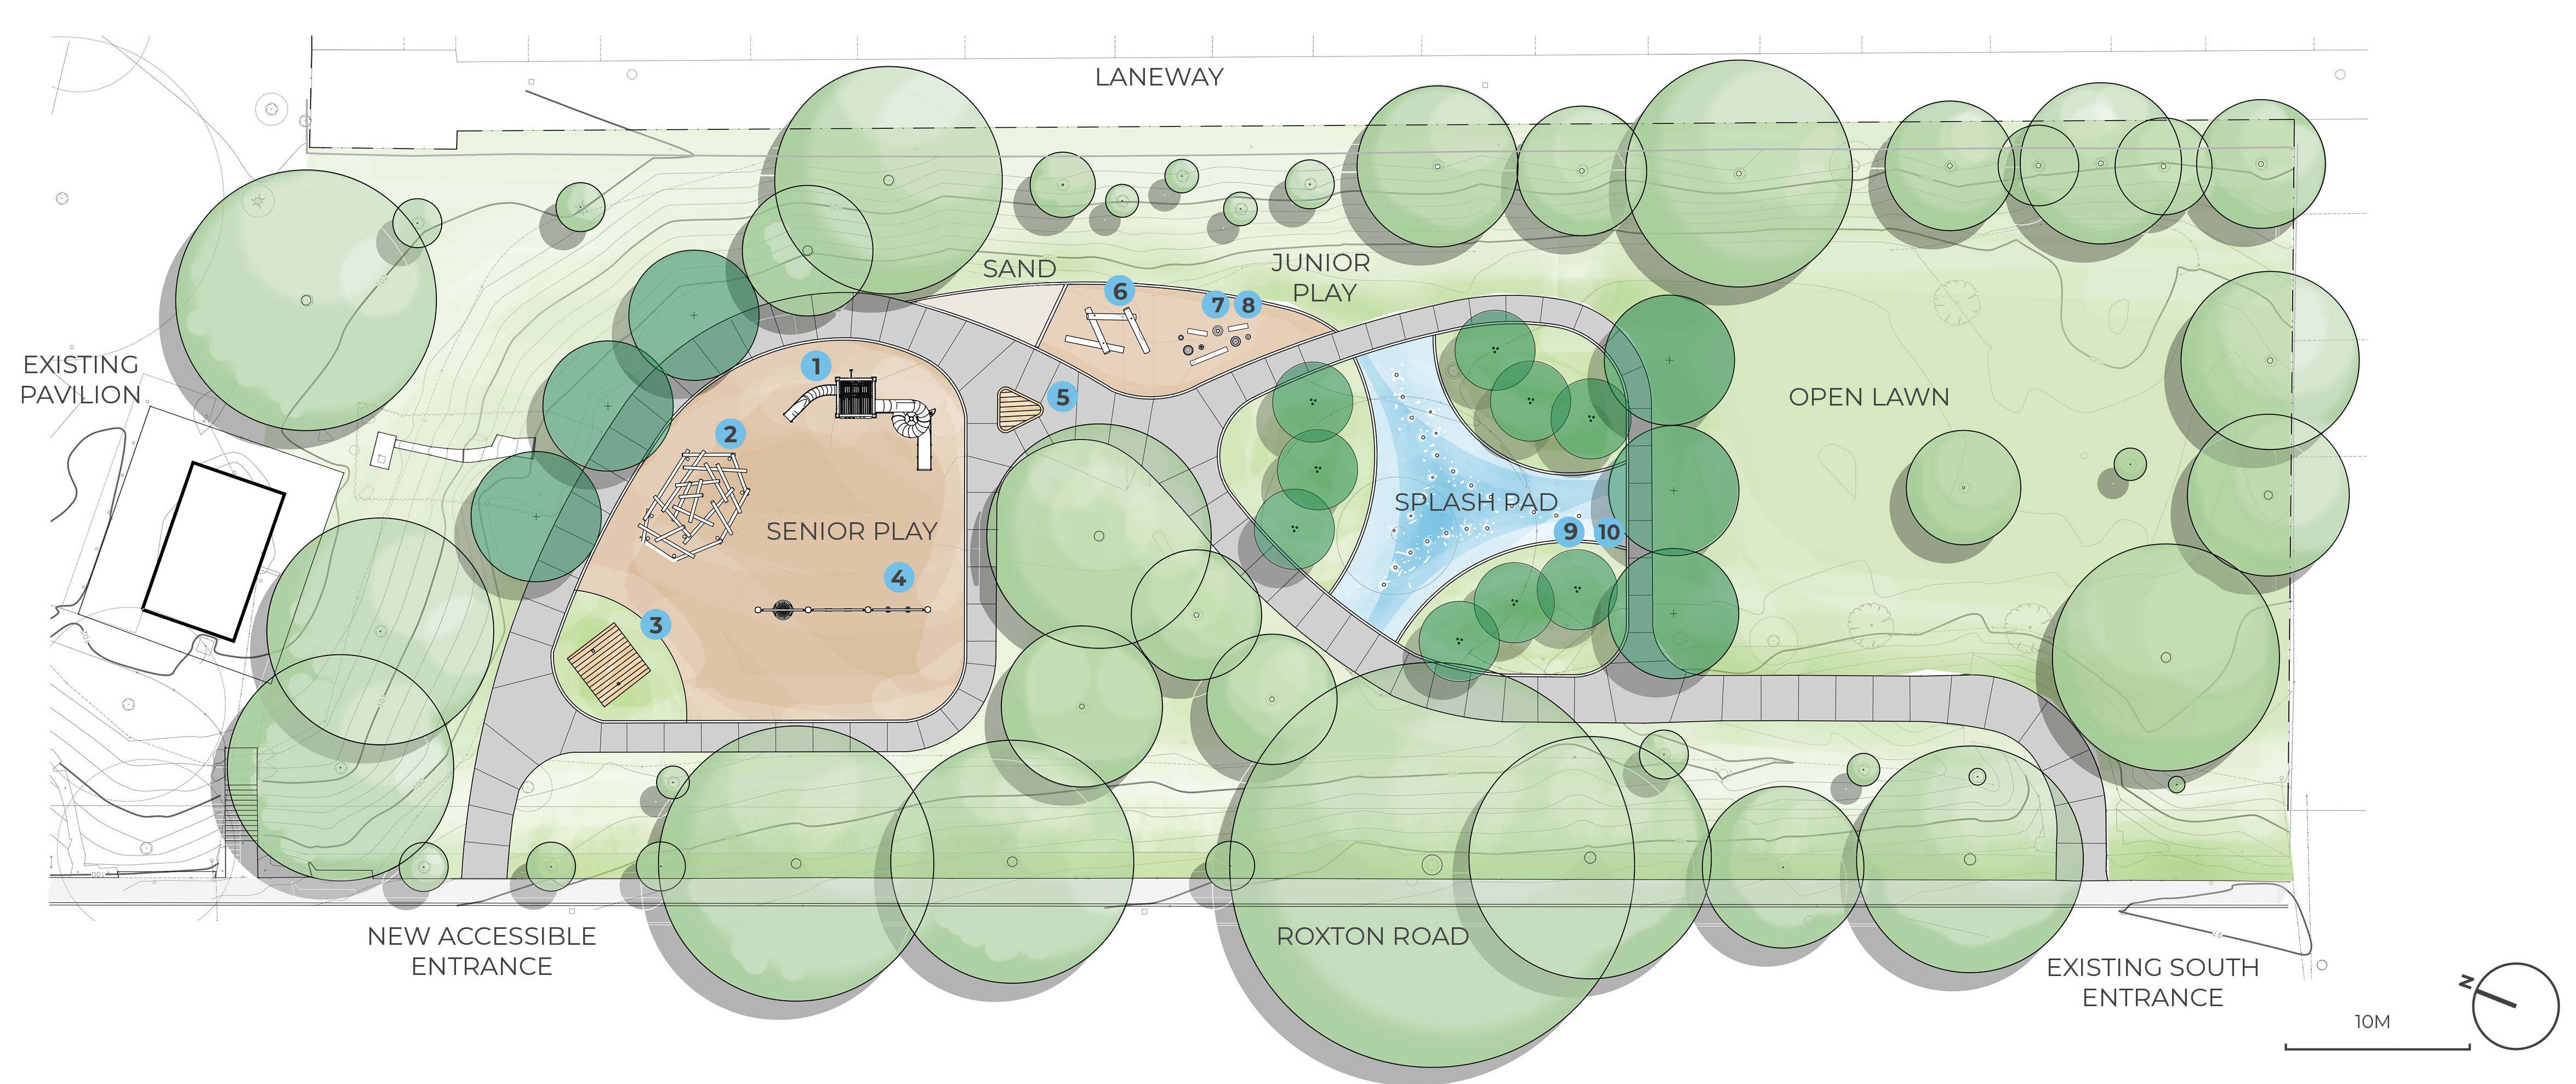 The plan for the Fred Hamilton Park improvements, which outlines the location of the open lawn (south side of park), splash pad (centre of park), junior play area (beside splash pad), senior play area (north side of park) and a new park entrance at the north side of the park that connects to Roxton Road. The pathway system throughout the park connects the north and south park entrances, with a pathway loop around the senior play area and splash pad. 